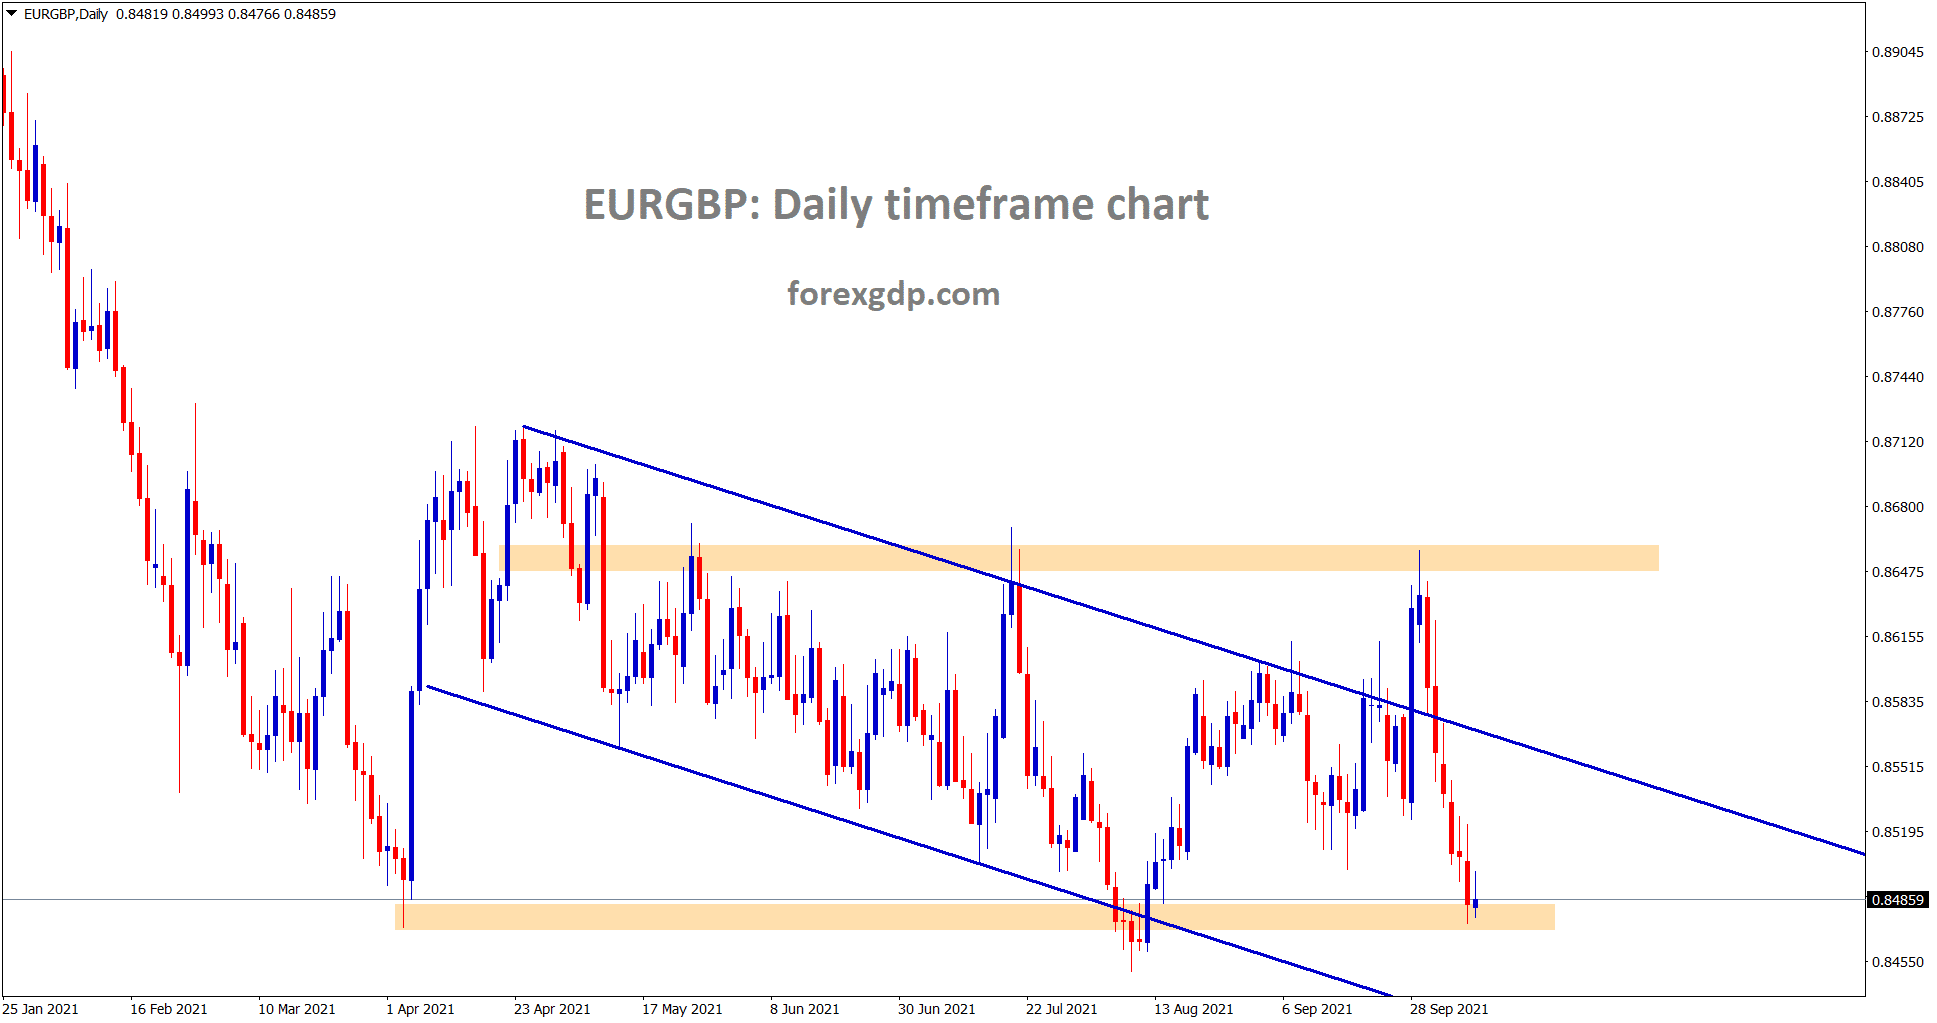 EURGBP is at the horizontal support area